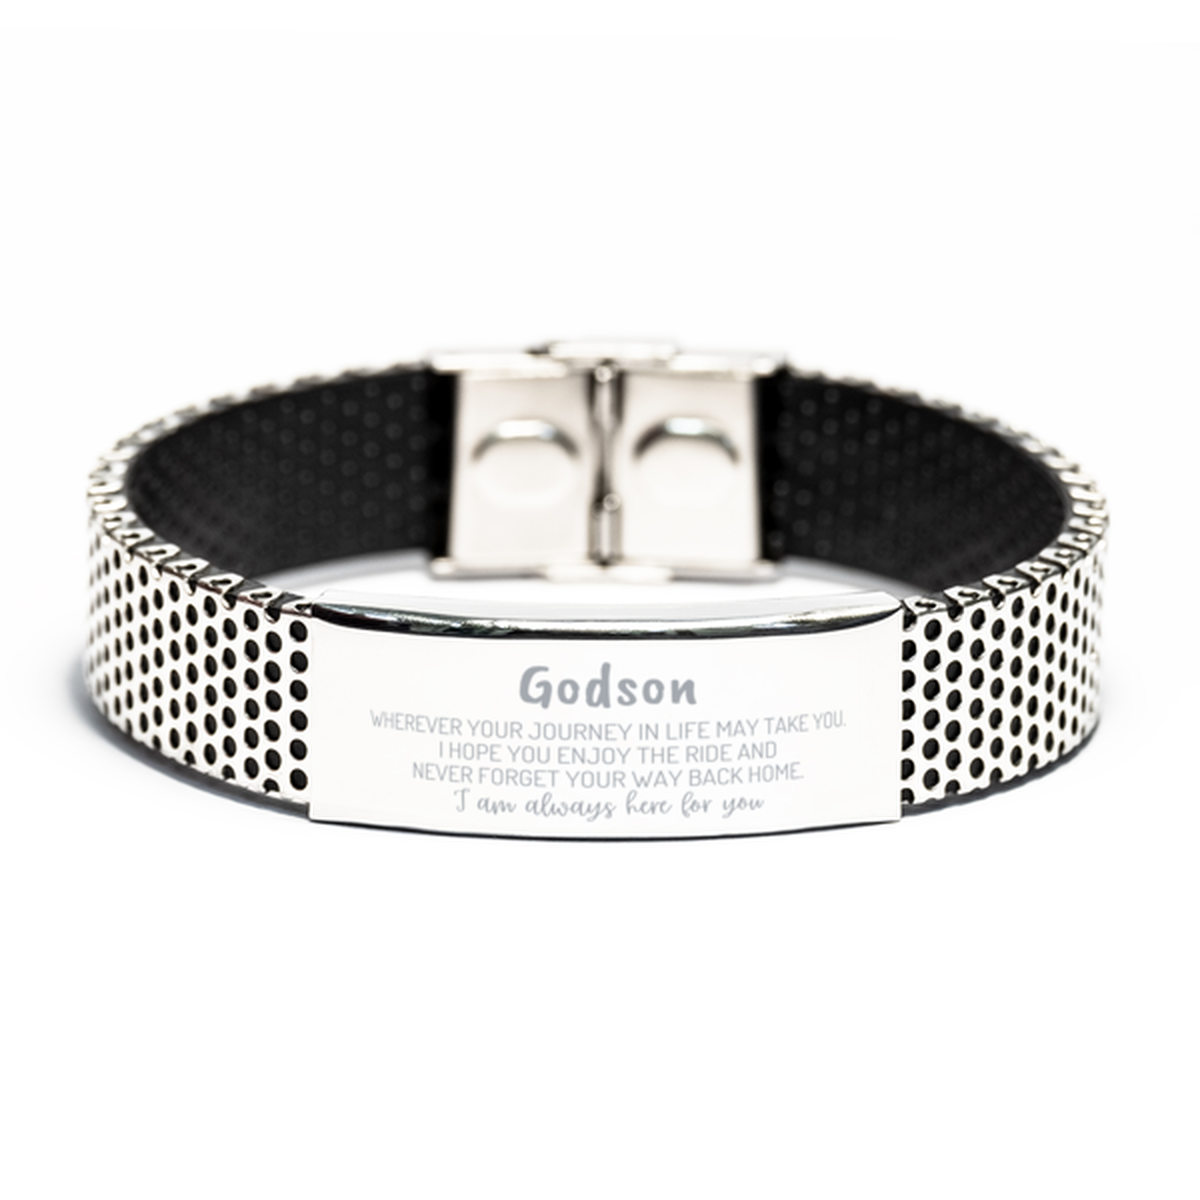 Godson wherever your journey in life may take you, I am always here for you Godson Stainless Steel Bracelet, Awesome Christmas Gifts For Godson, Godson Birthday Gifts for Men Women Family Loved One